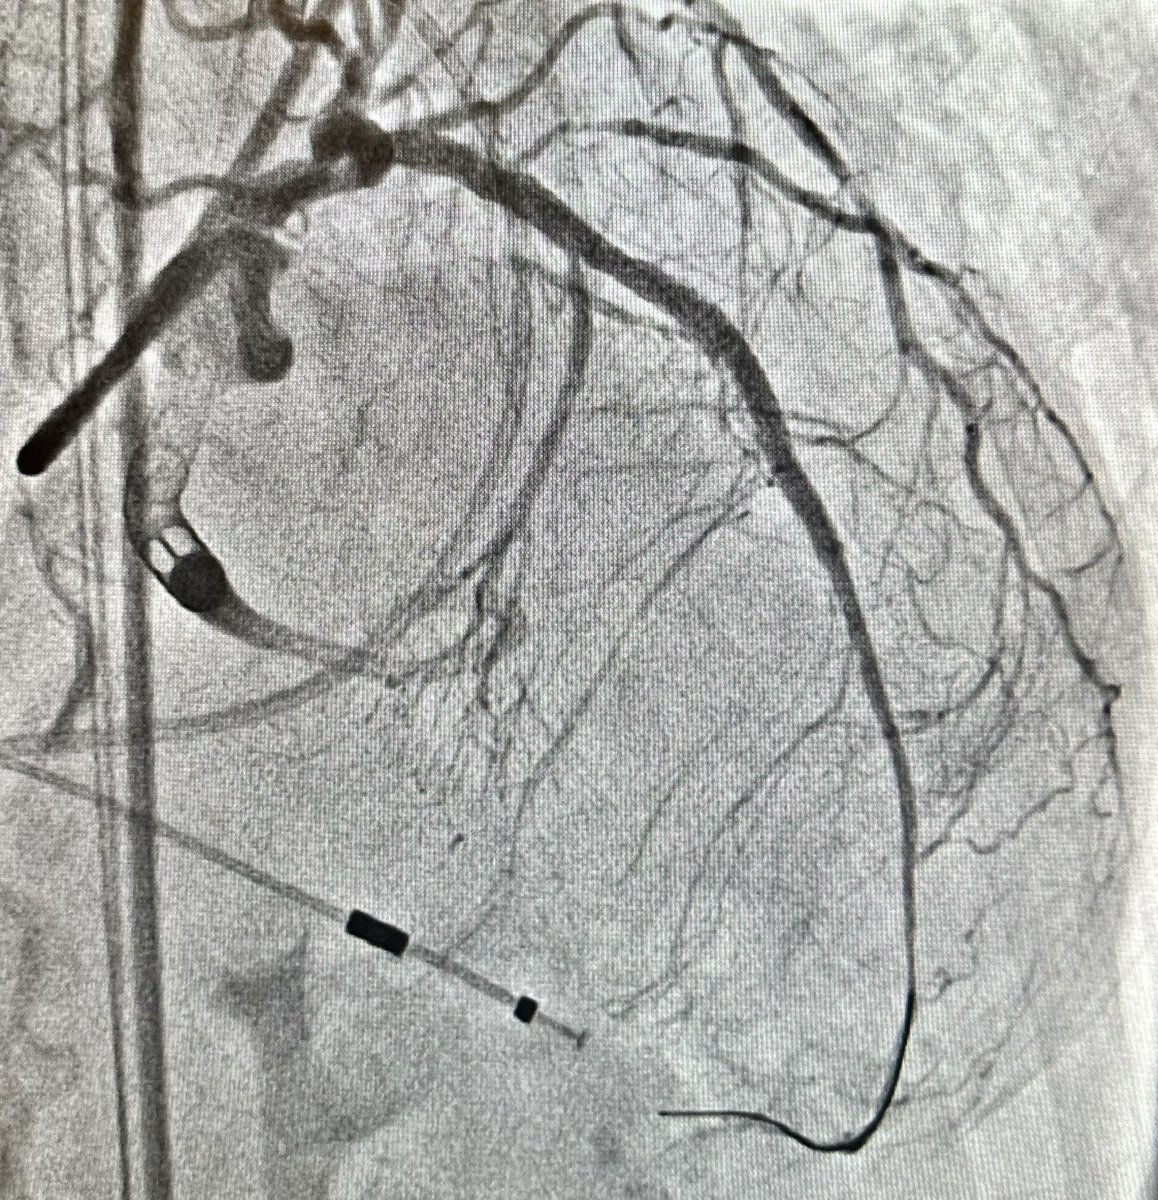 #CTOPCI #CaseFiles from #PennsyInterventions:  AWE with successful crossing but unable to traverse prox cap calcification with MC, requiring wiring with Rotawire via created micro-channel, and subsequent rotational atherectomy for optimized stent deployment. 
@ReVascMed